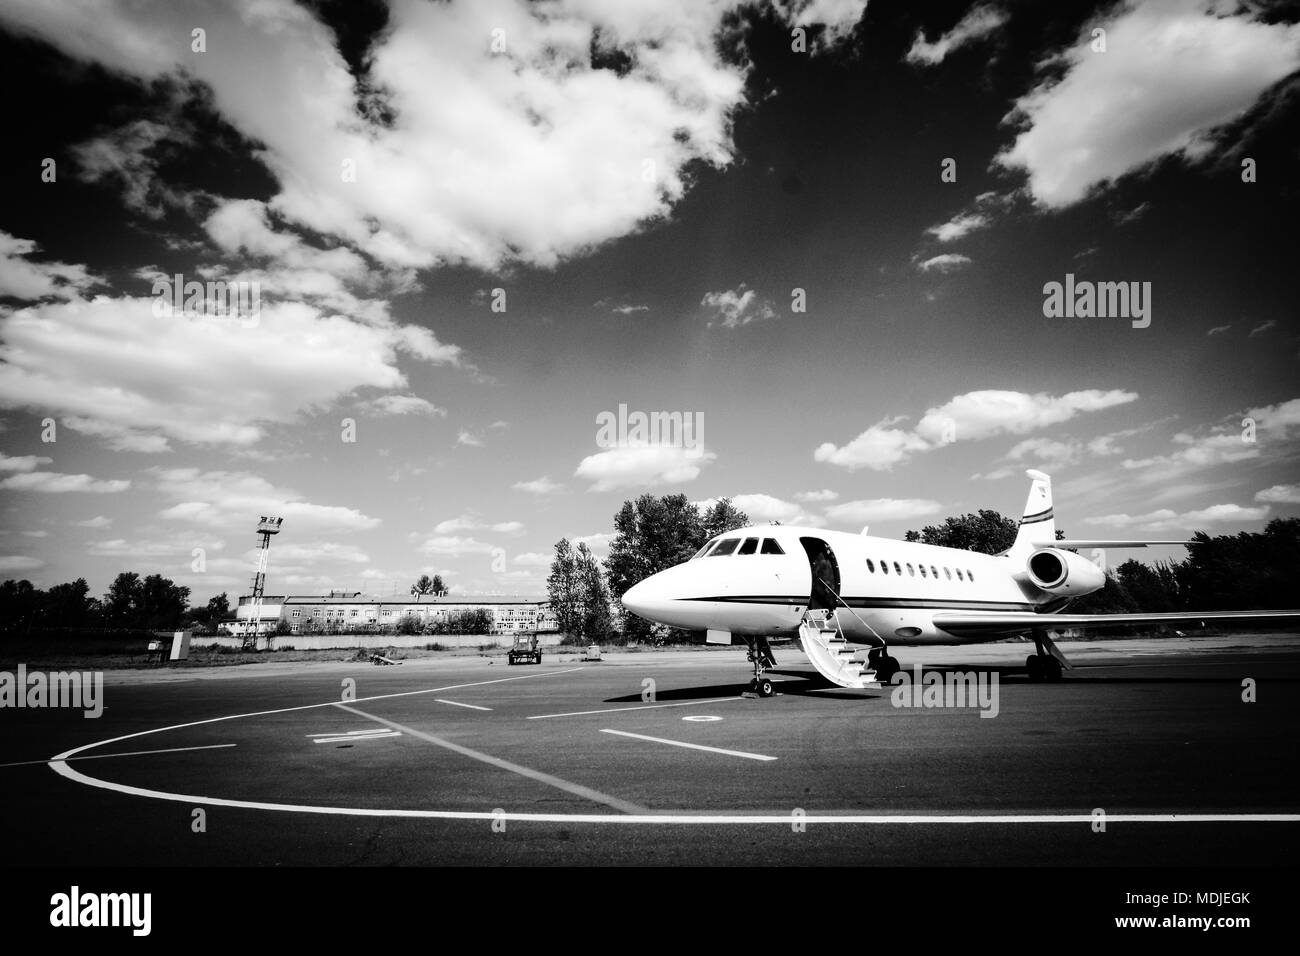 Falcon 2000 business jet is waiting for passengers and ready to go Stock Photo